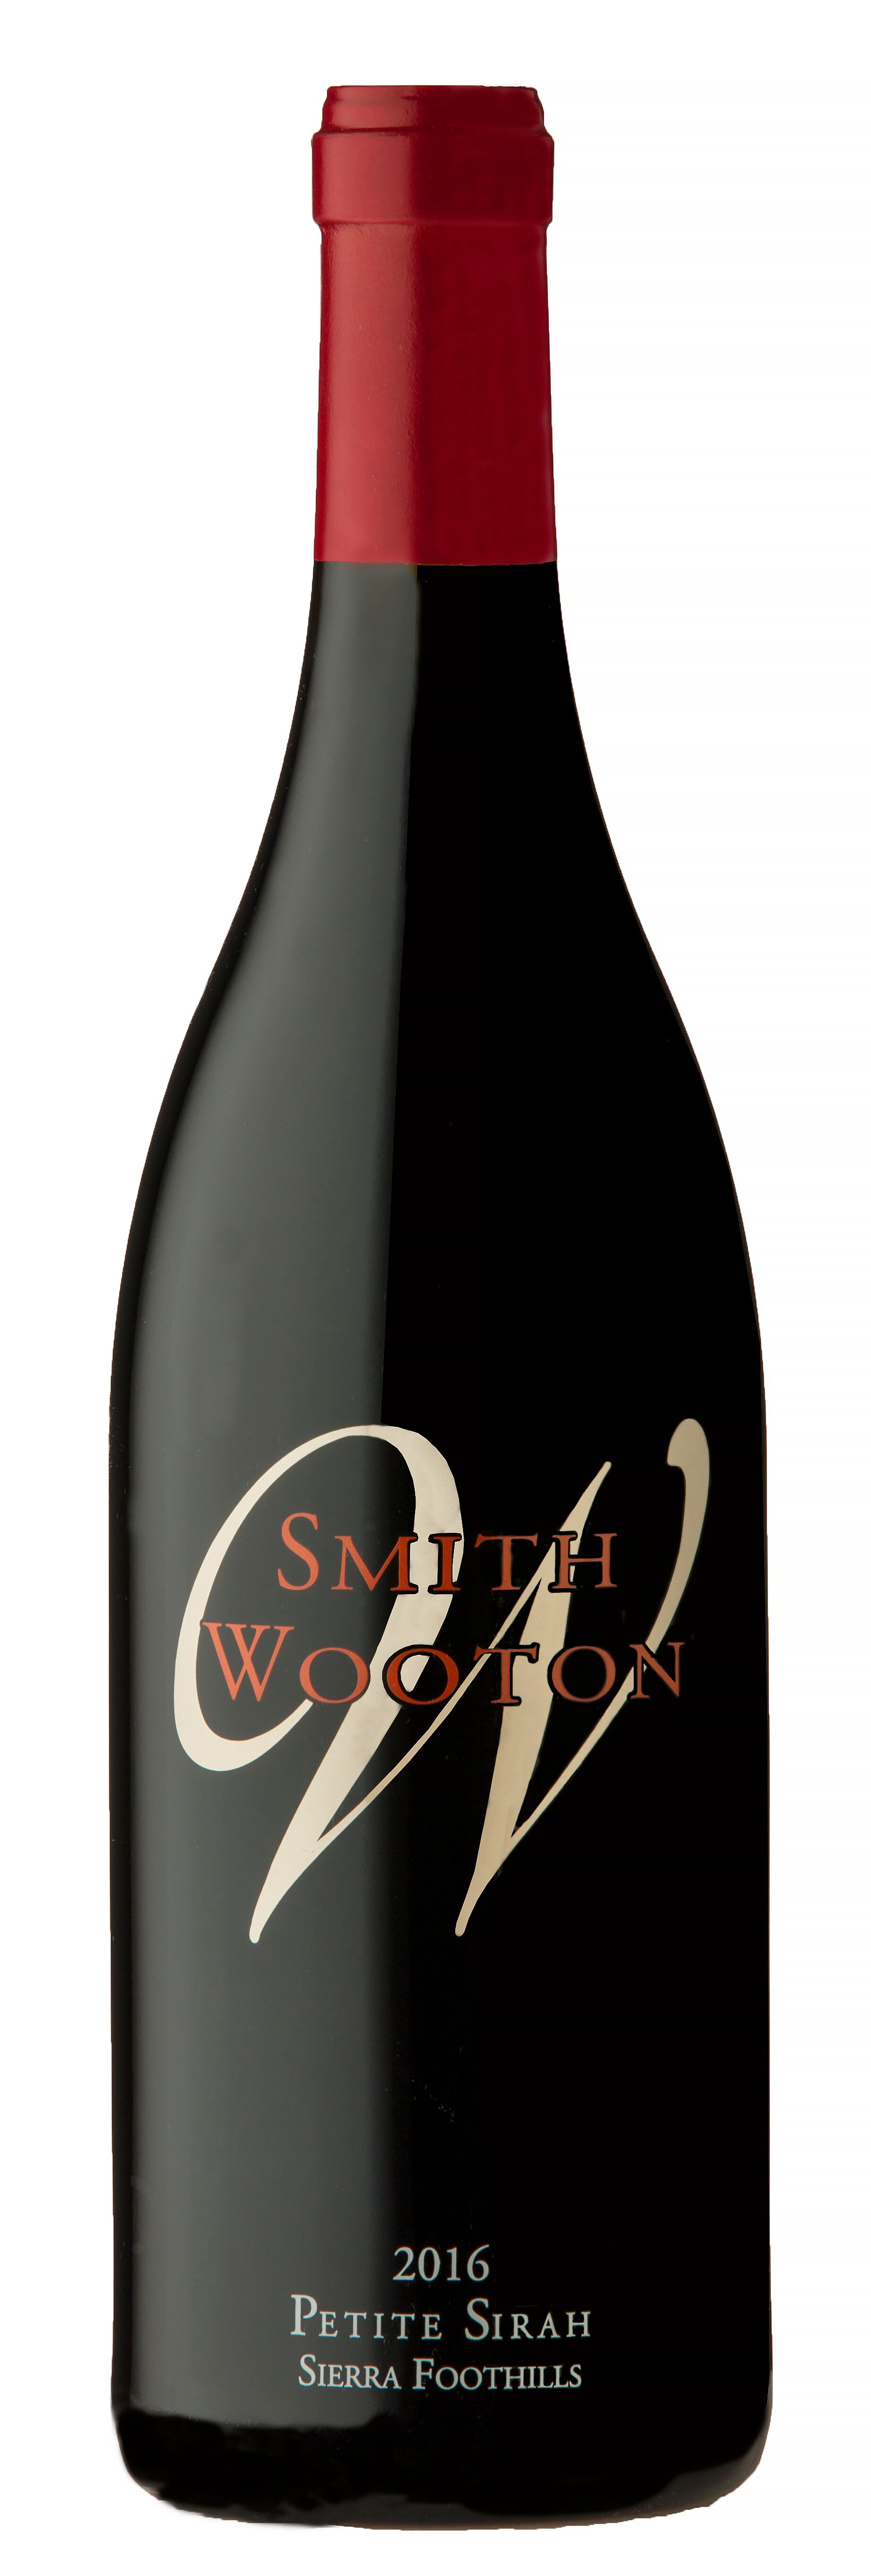 Product Image for 2016 Smith Wooton Petite Sirah, Sierra Foothills 